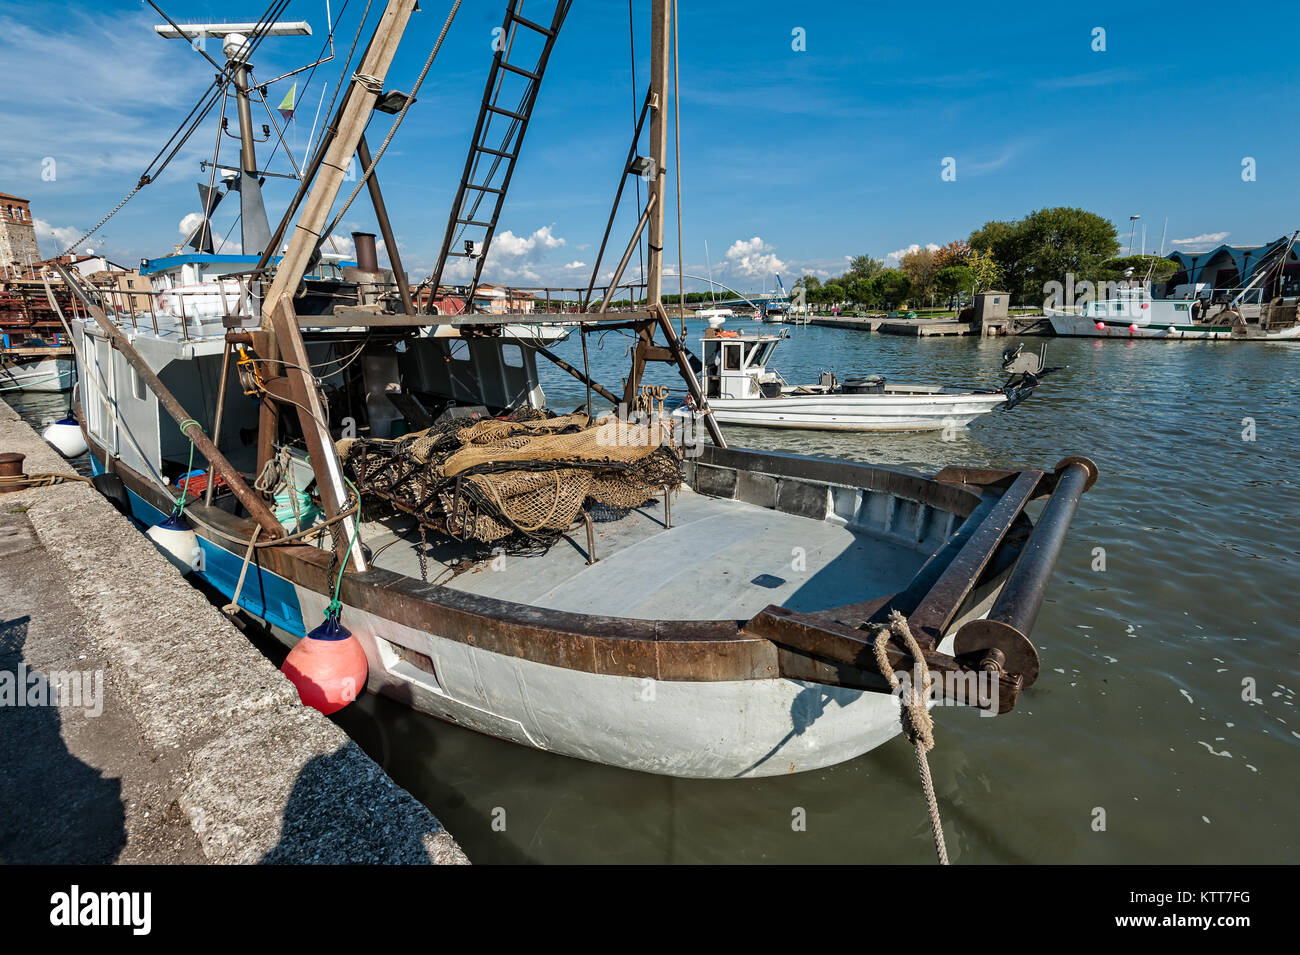 Commercial fishing boats moored in harbor. Stock Photo